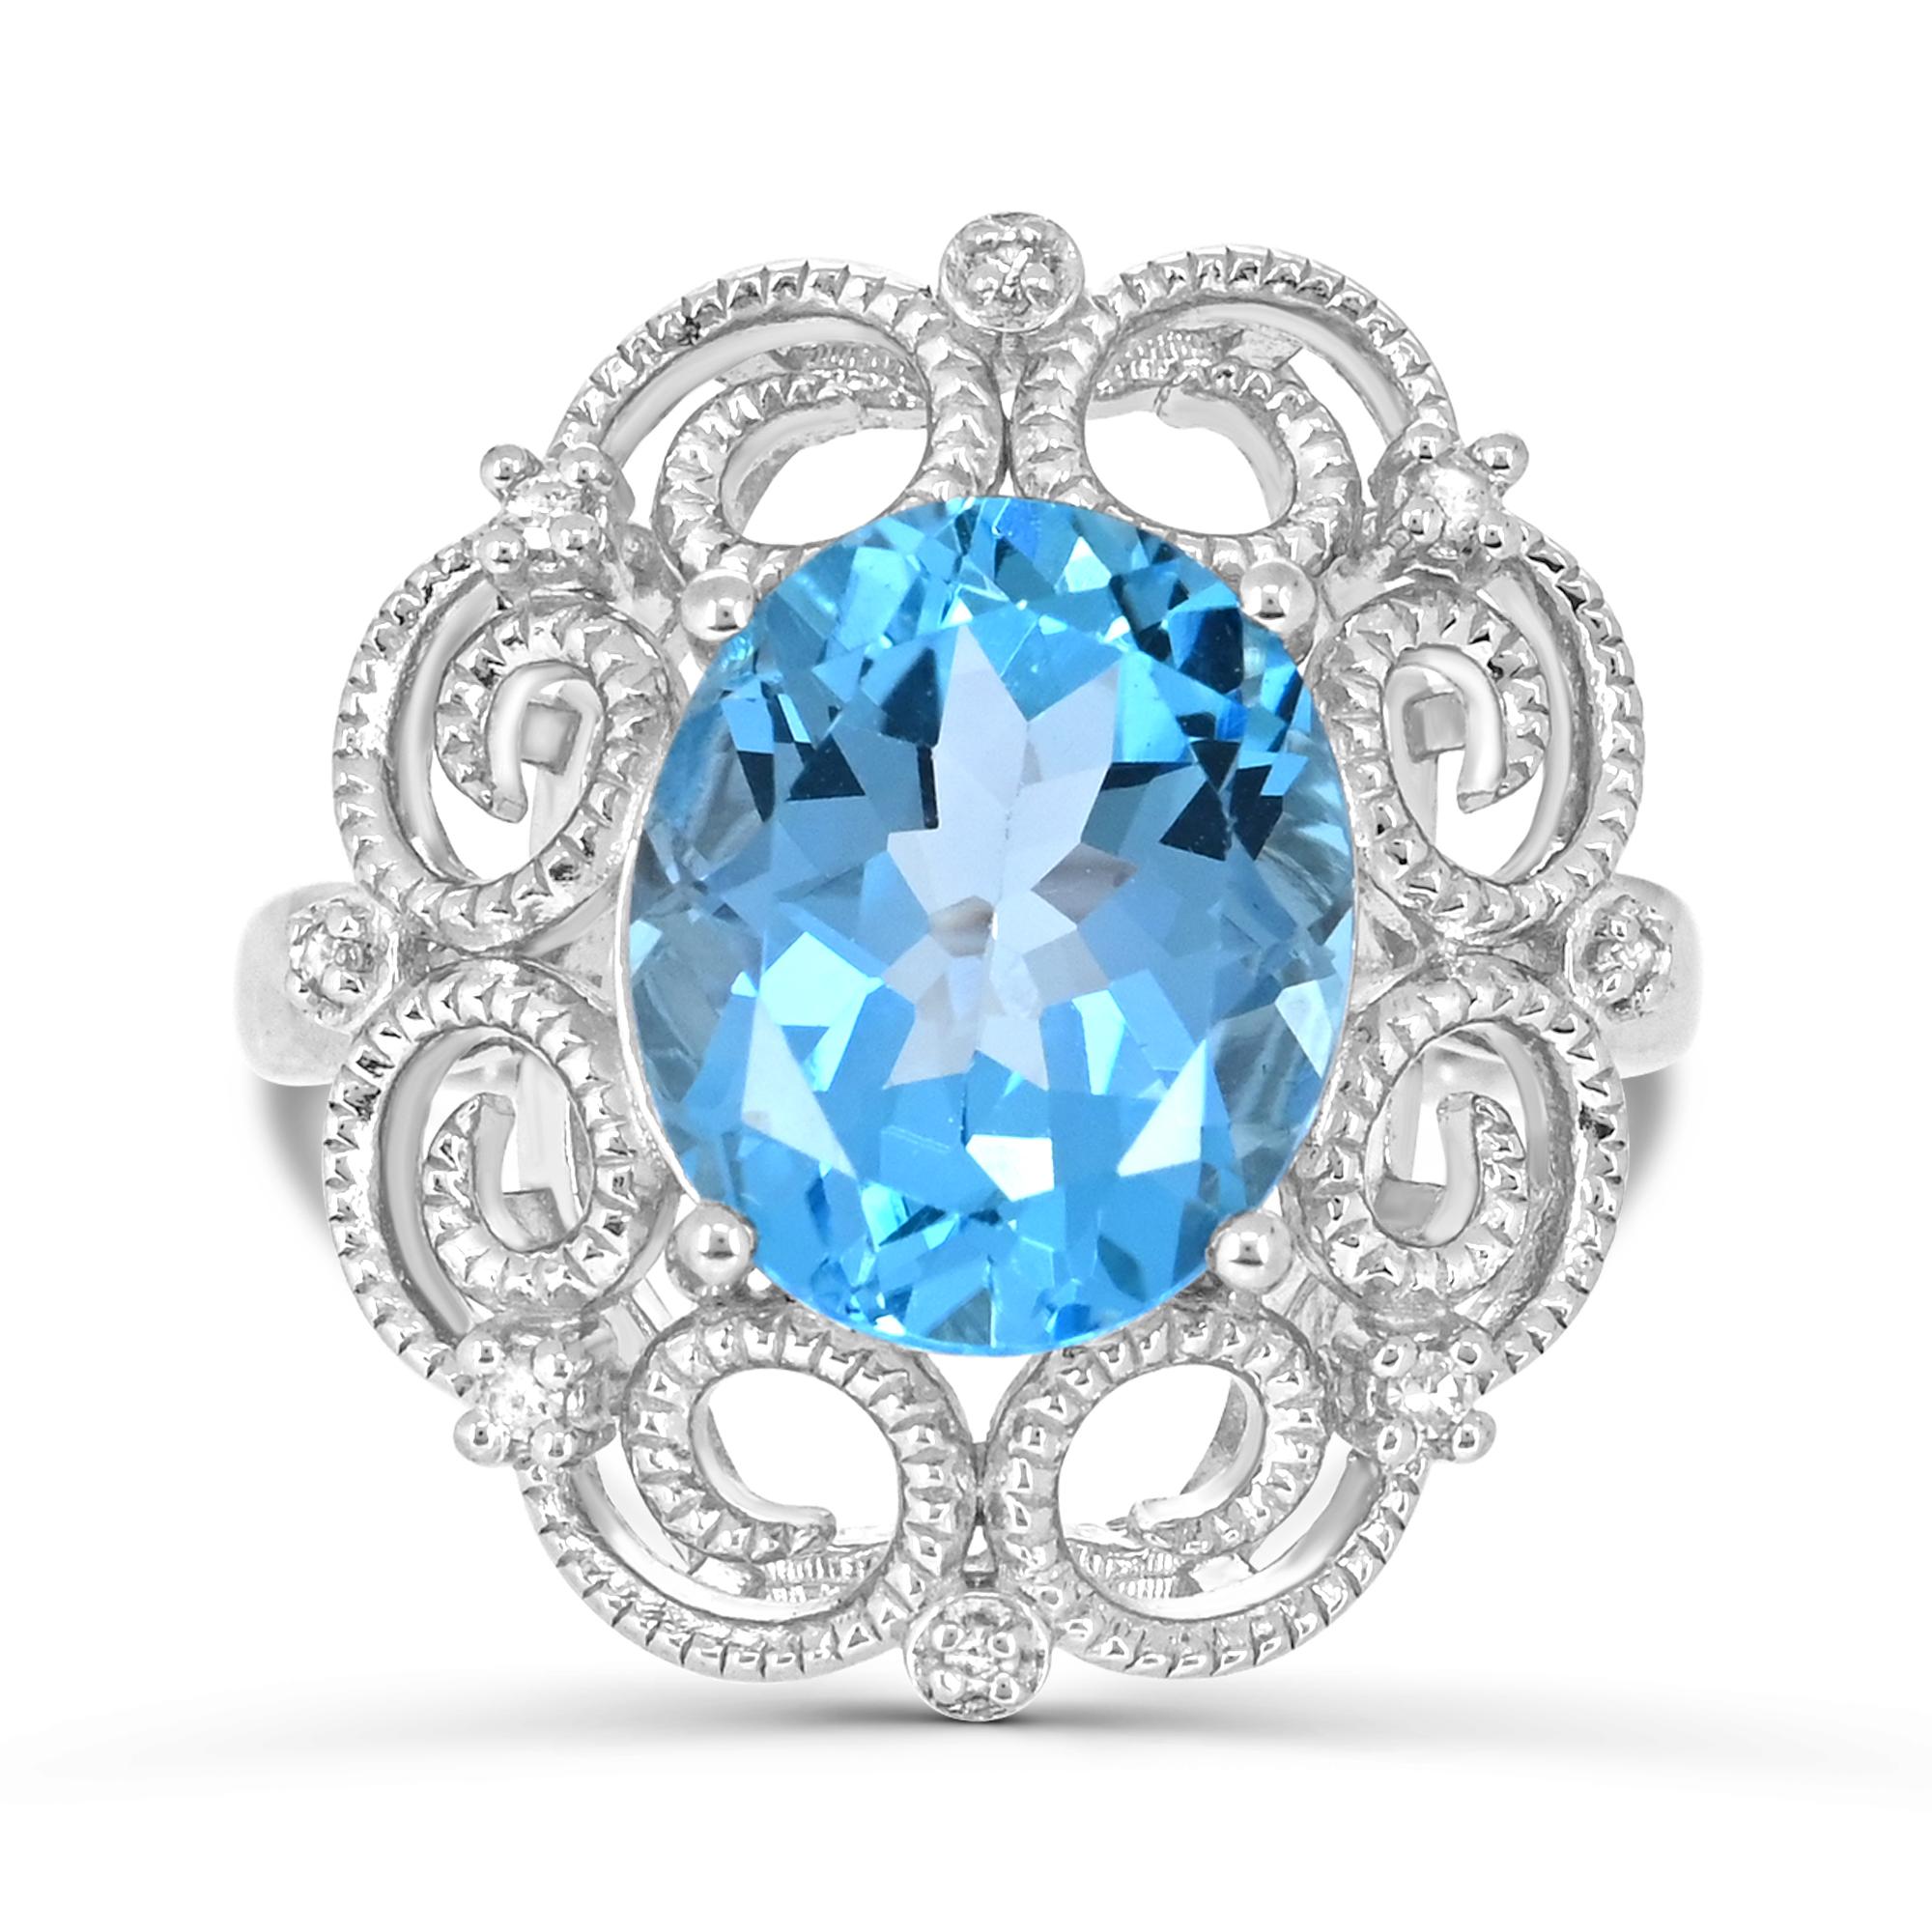 Indulge in the elegance of our Oval Swiss Blue Topaz and Diamond Accent Retro Border Sterling Silver Ring. Crafted with meticulous attention to detail, this ring boasts a stunning combination of one oval Swiss blue topaz accented by sparkling white